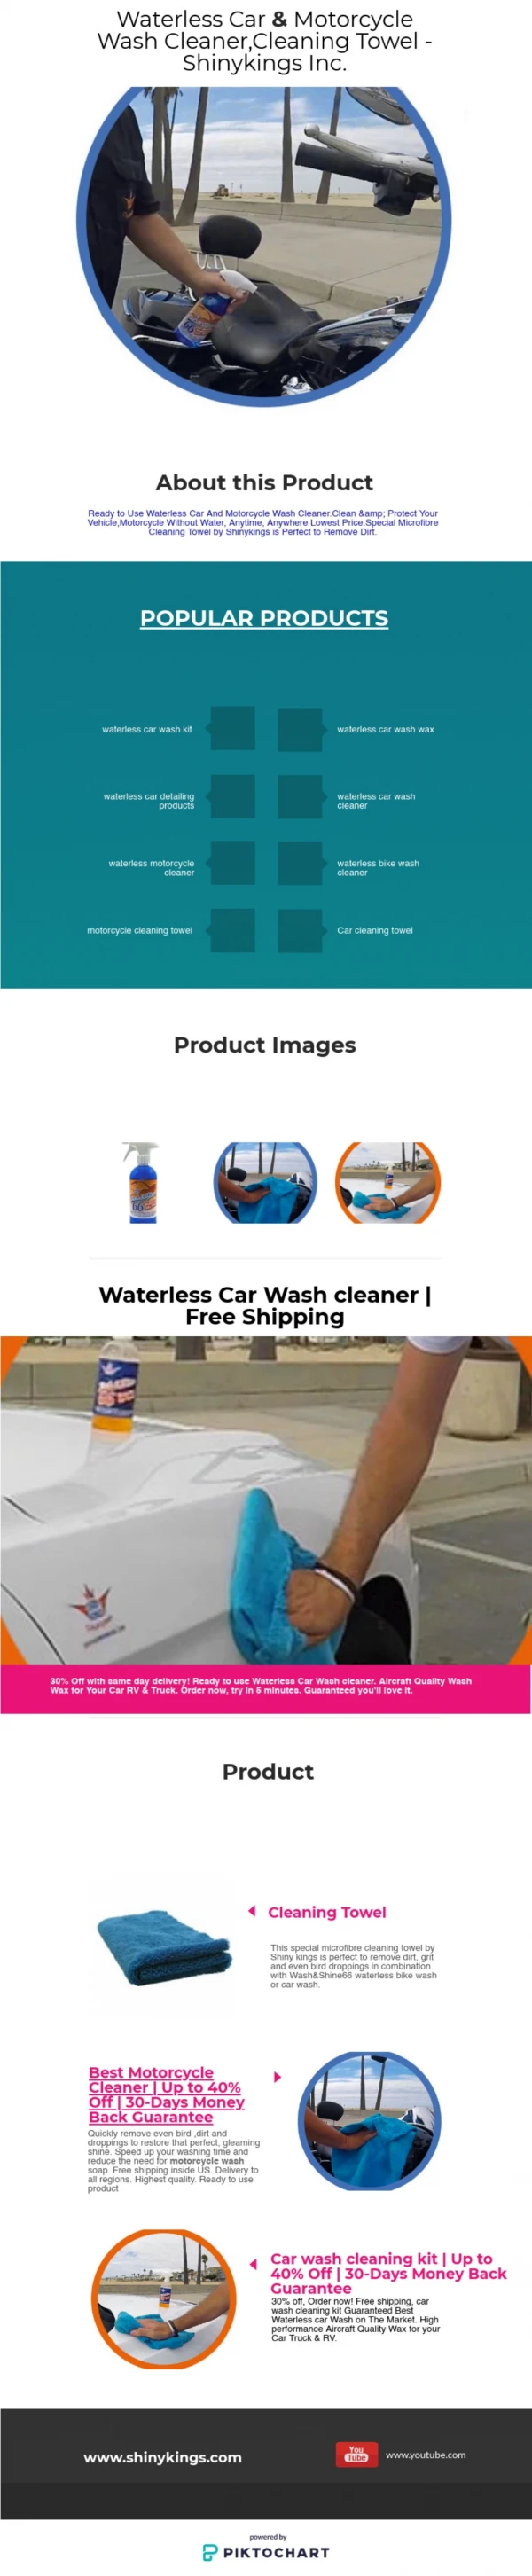 Waterless Car Wash cleaner | Free Shipping | Just $29.98